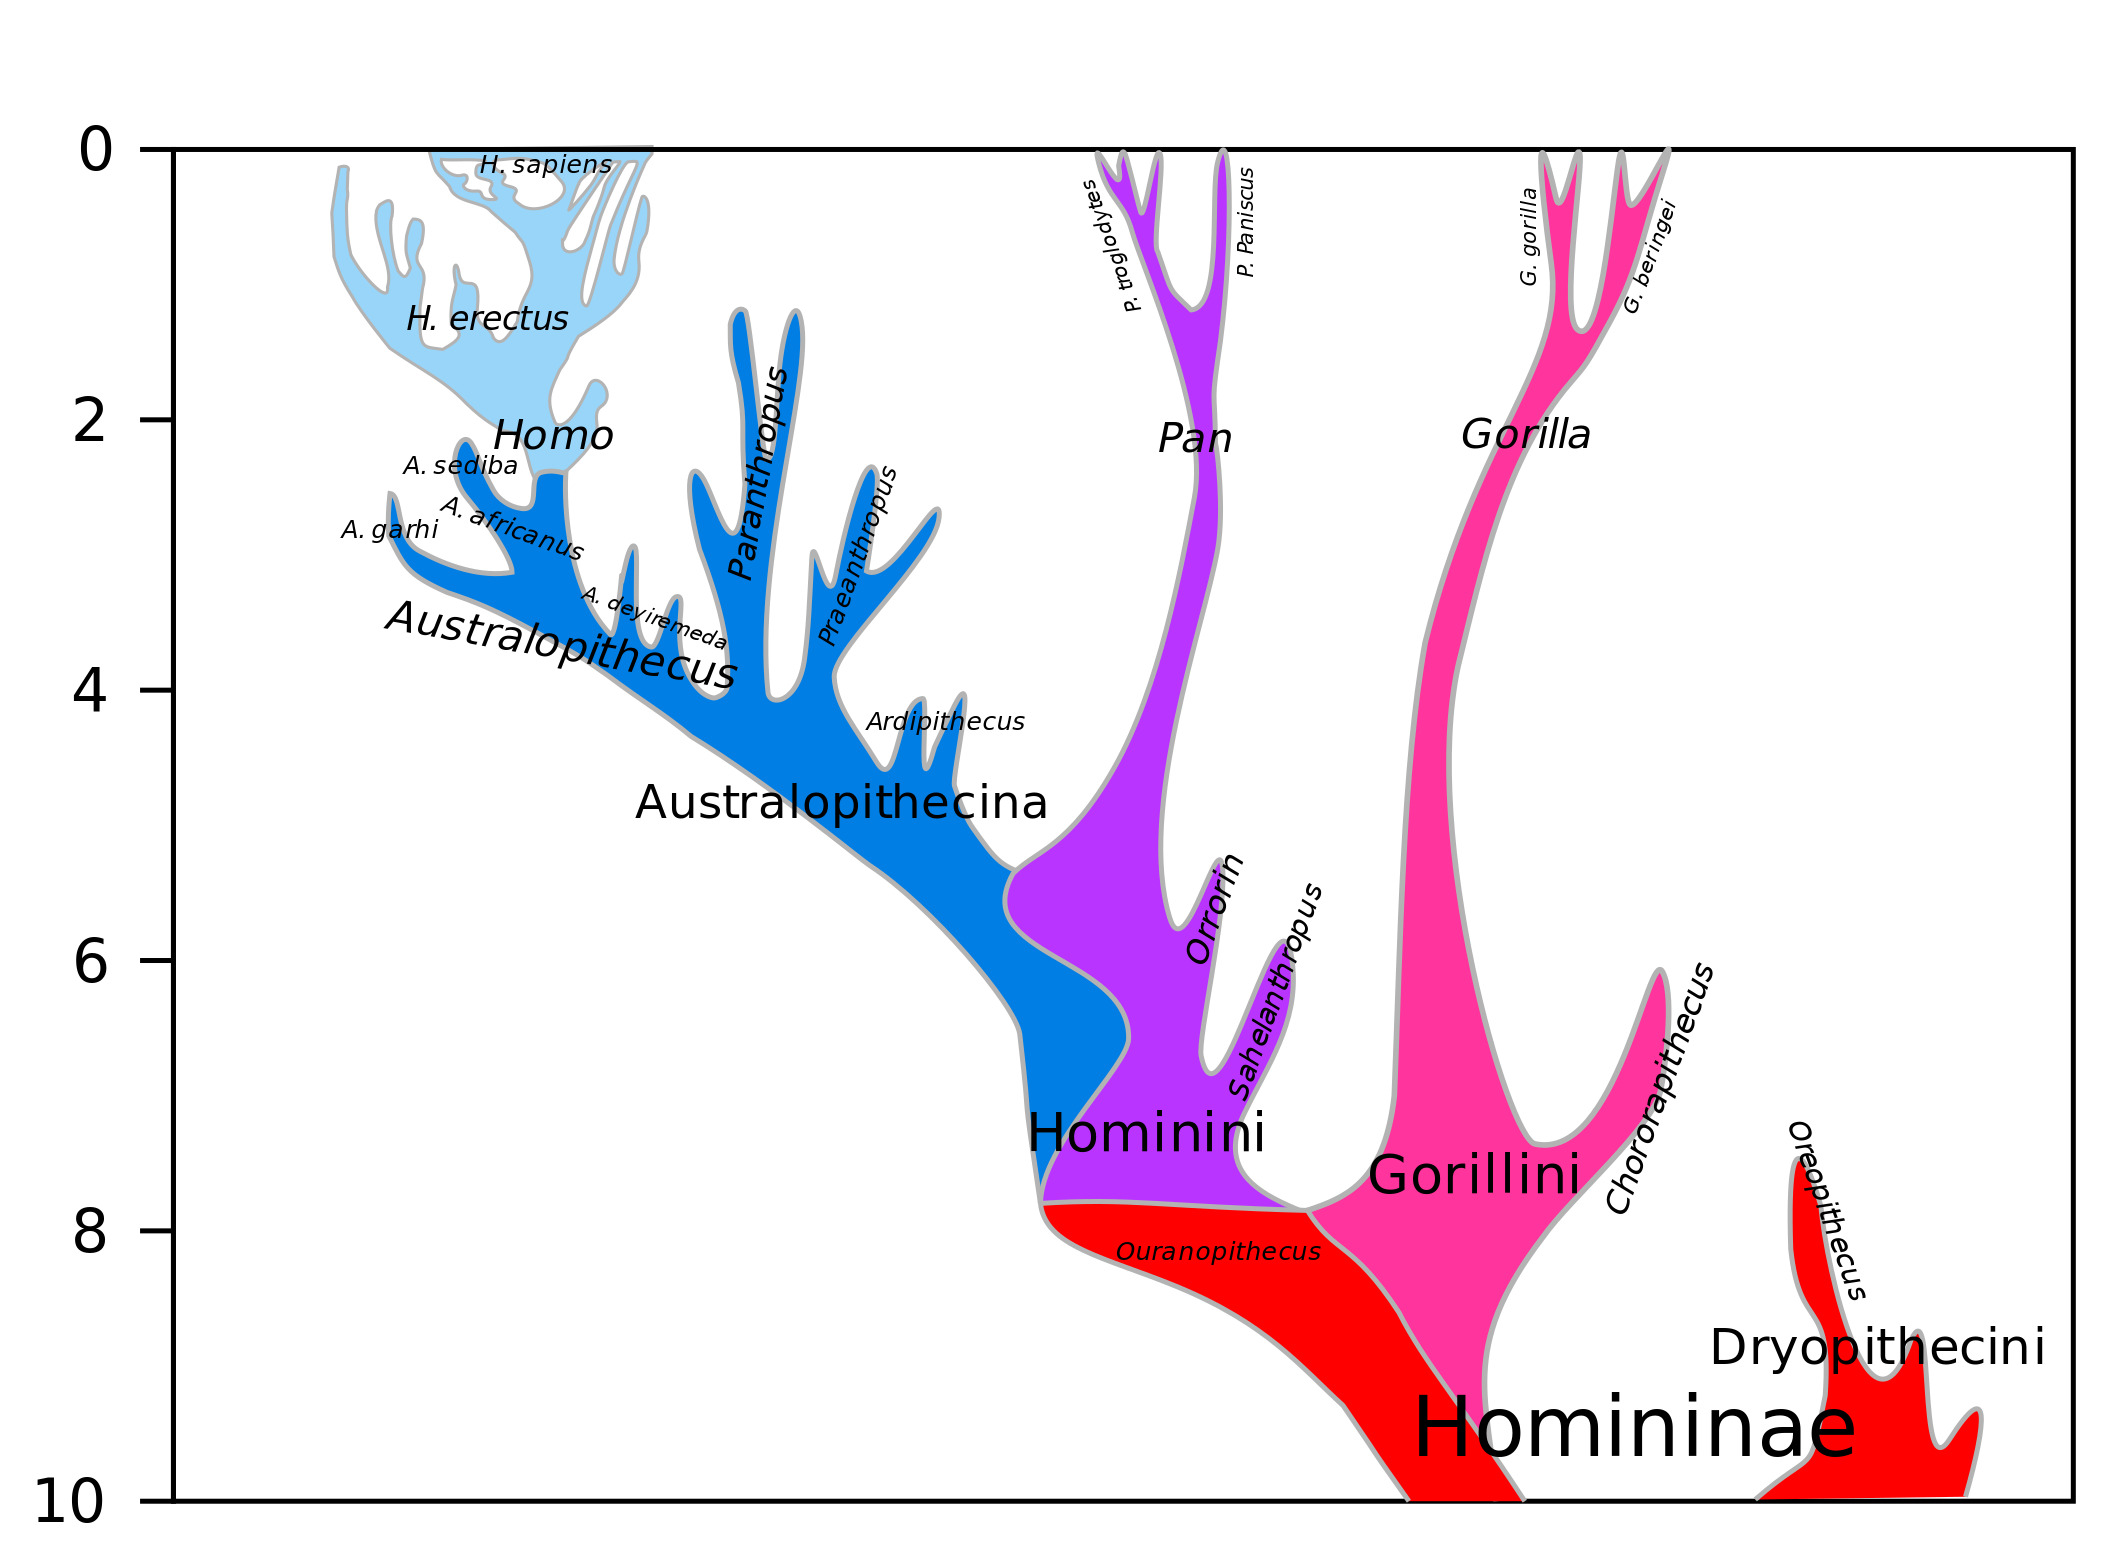 A Model of the phylogeny of Hominini over the past 10 million years. A pink line for Gorillini splits off around 8Ma, a purple line for Pan splits off around 6Ma, and Homo and Australopithecines continue on to today, represented by a lone species, Homo Sapiens. (Image: Wikimedia, Dbachmann - Own work, CC BY-SA 4.0)